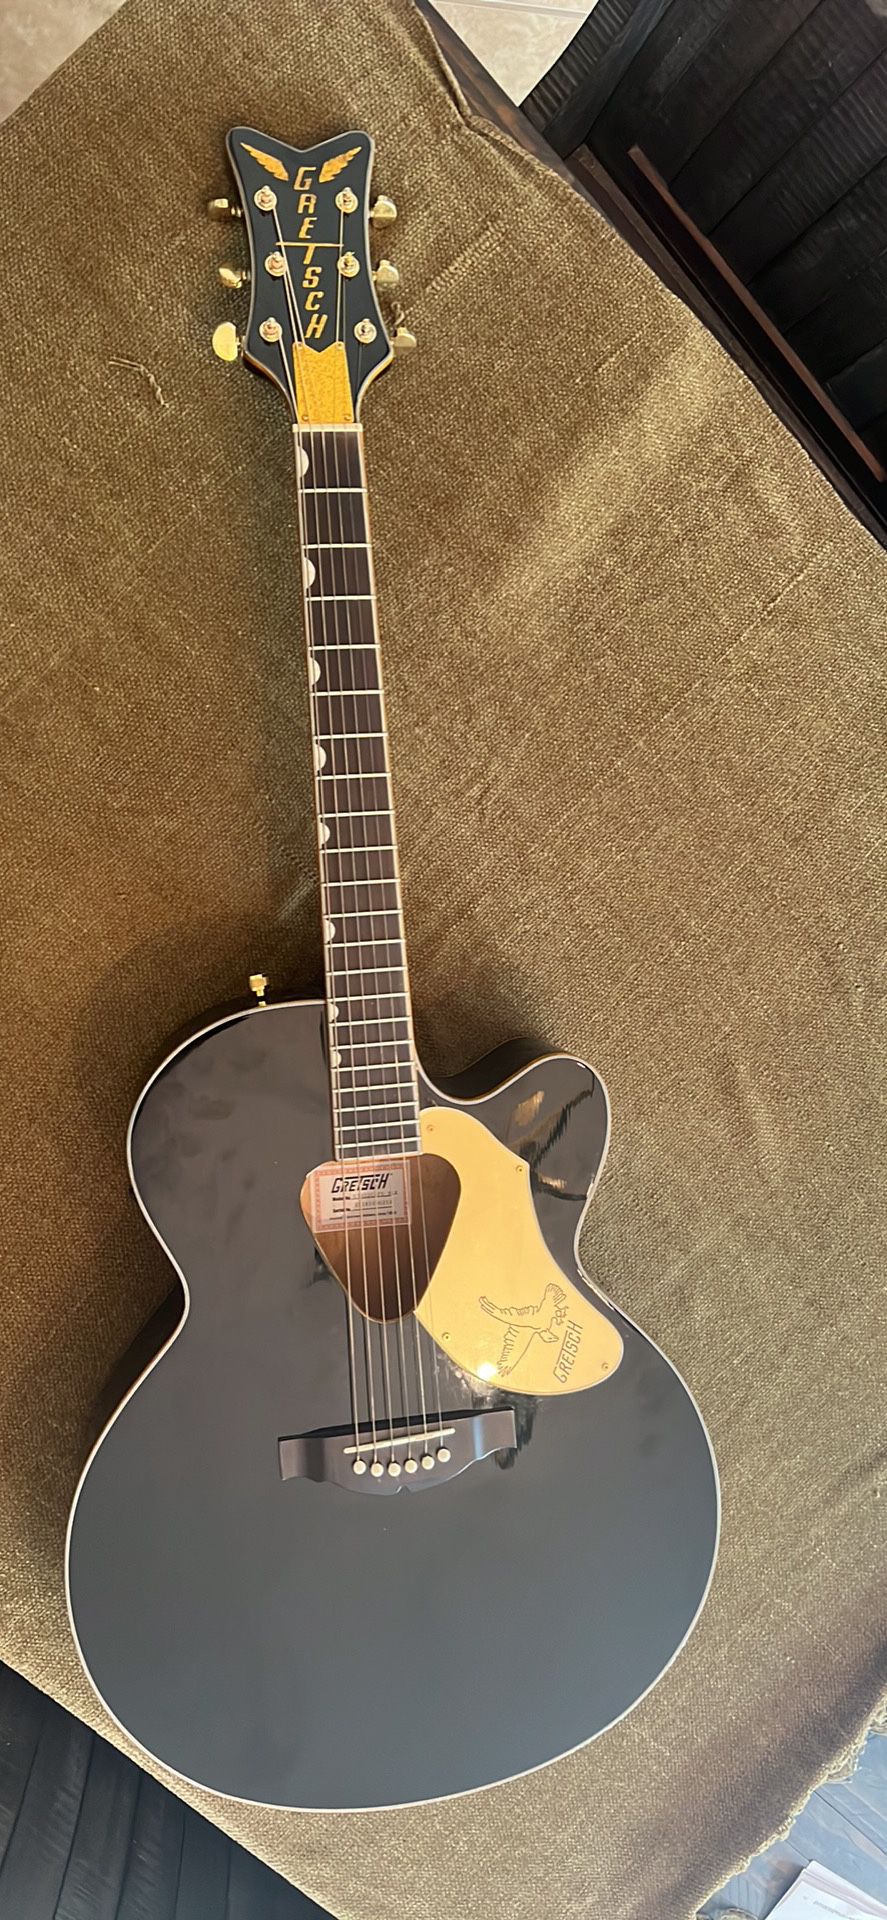 Gretsch Acoustic/Electric guitar